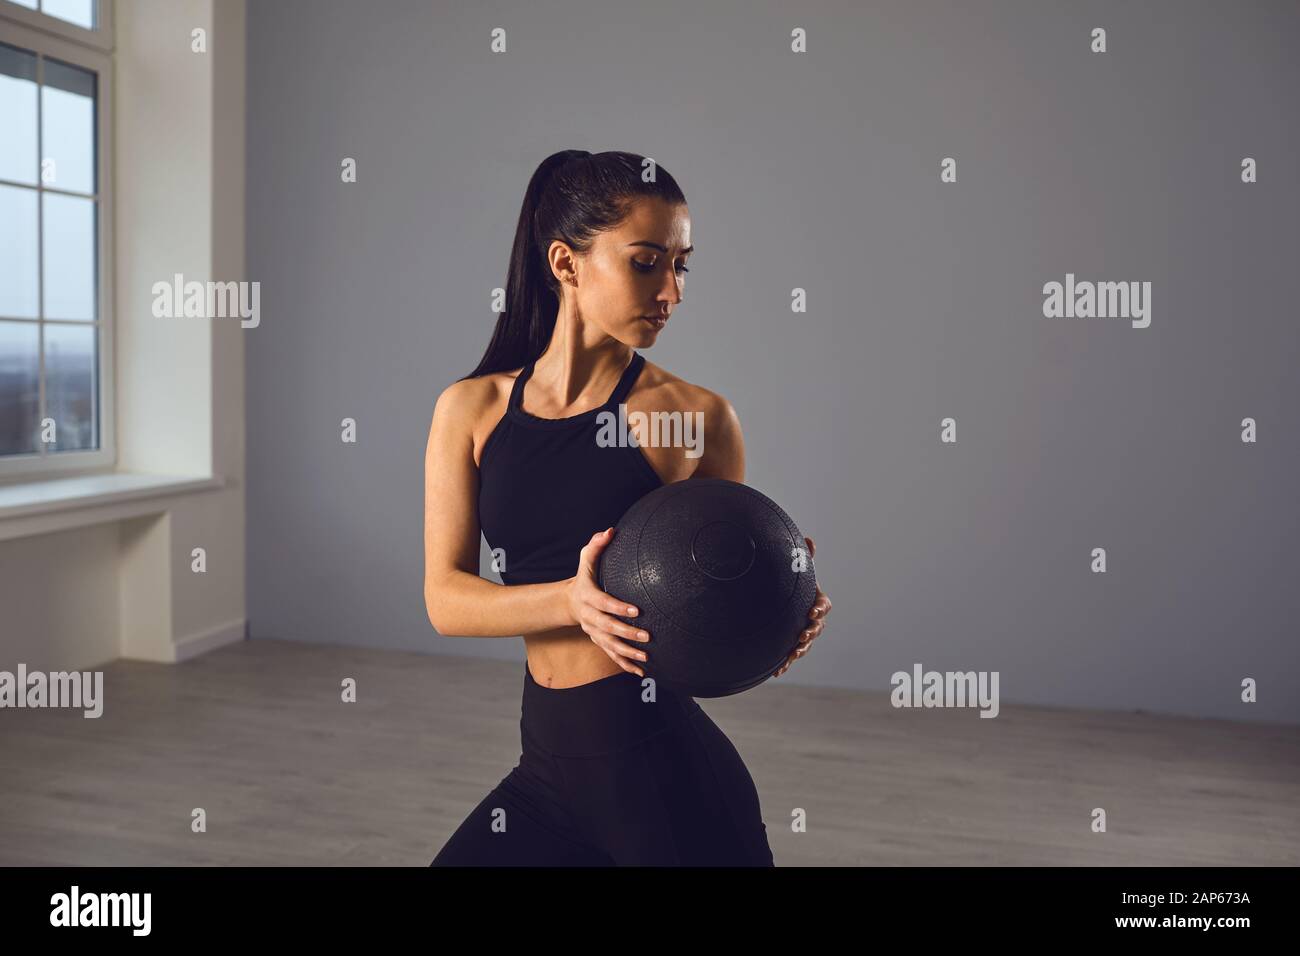 The girl goes in for sports with a medical ball. A sports girl does exercises in a room indoors. Stock Photo